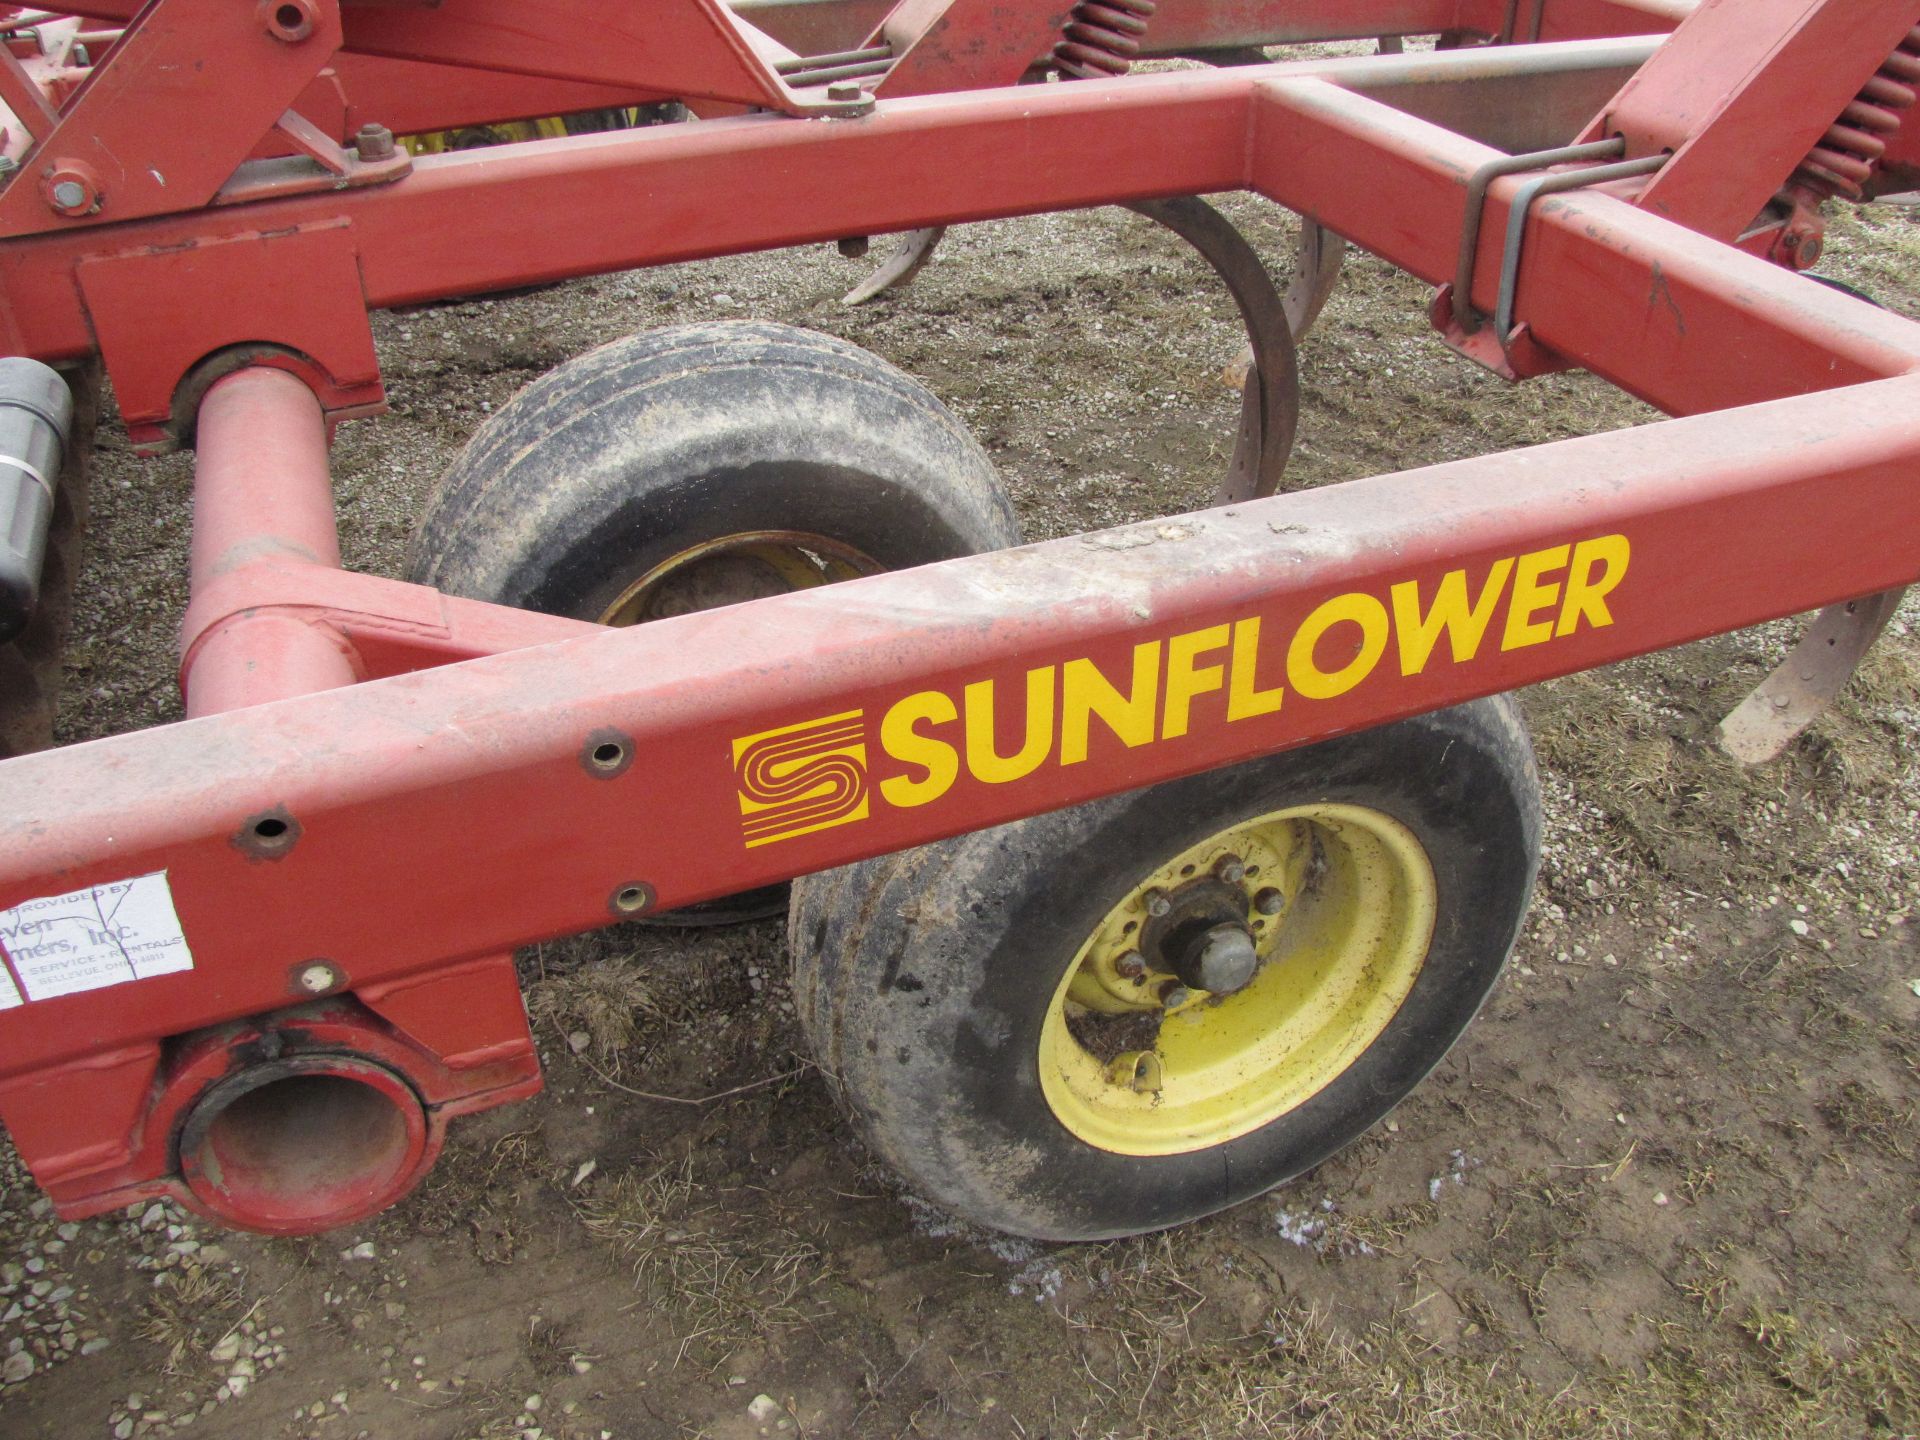 Sunflower 4212-14 11-Shank Disc Chisel Plow - Image 20 of 24